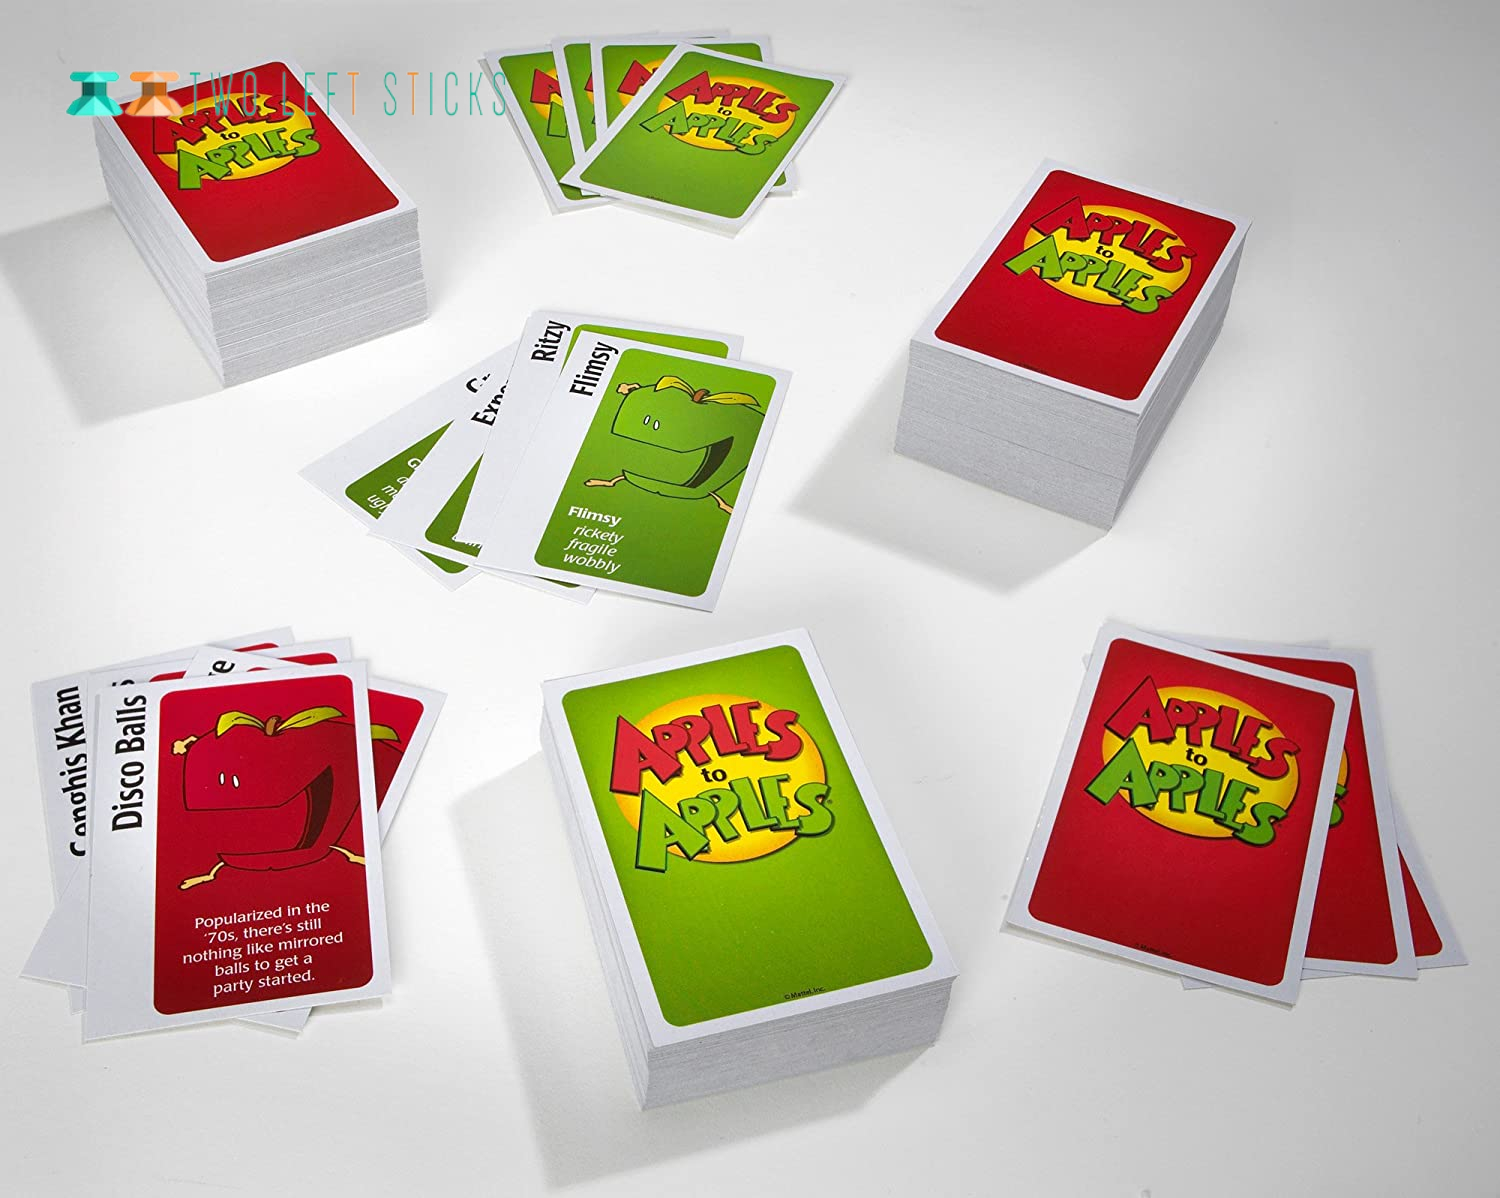 Apples to Apples